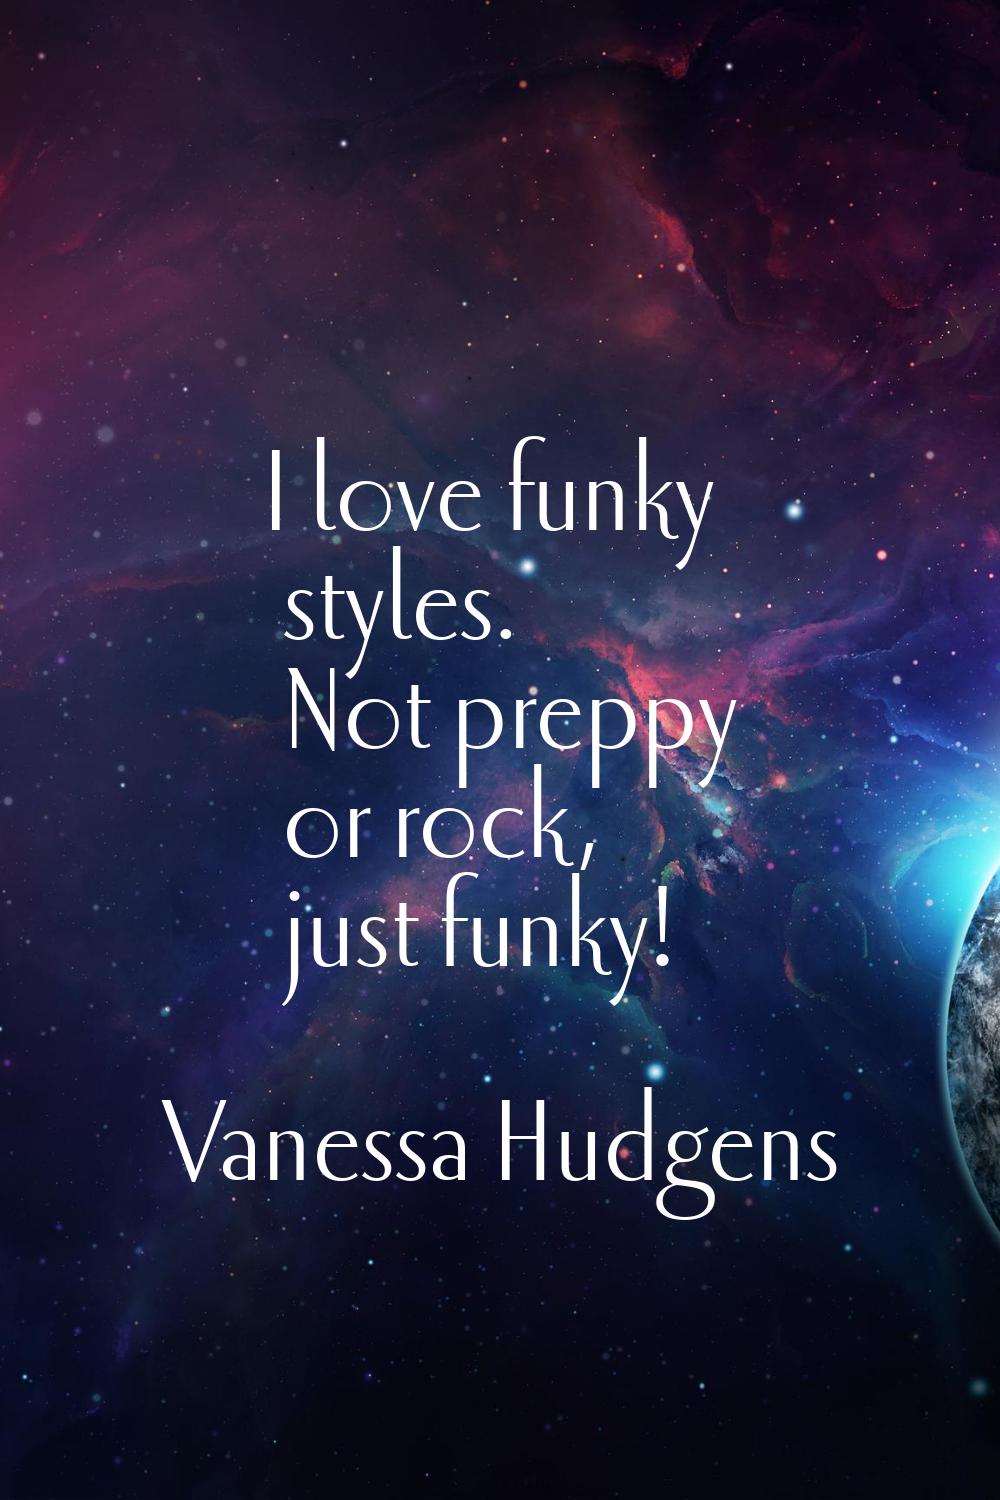 I love funky styles. Not preppy or rock, just funky!